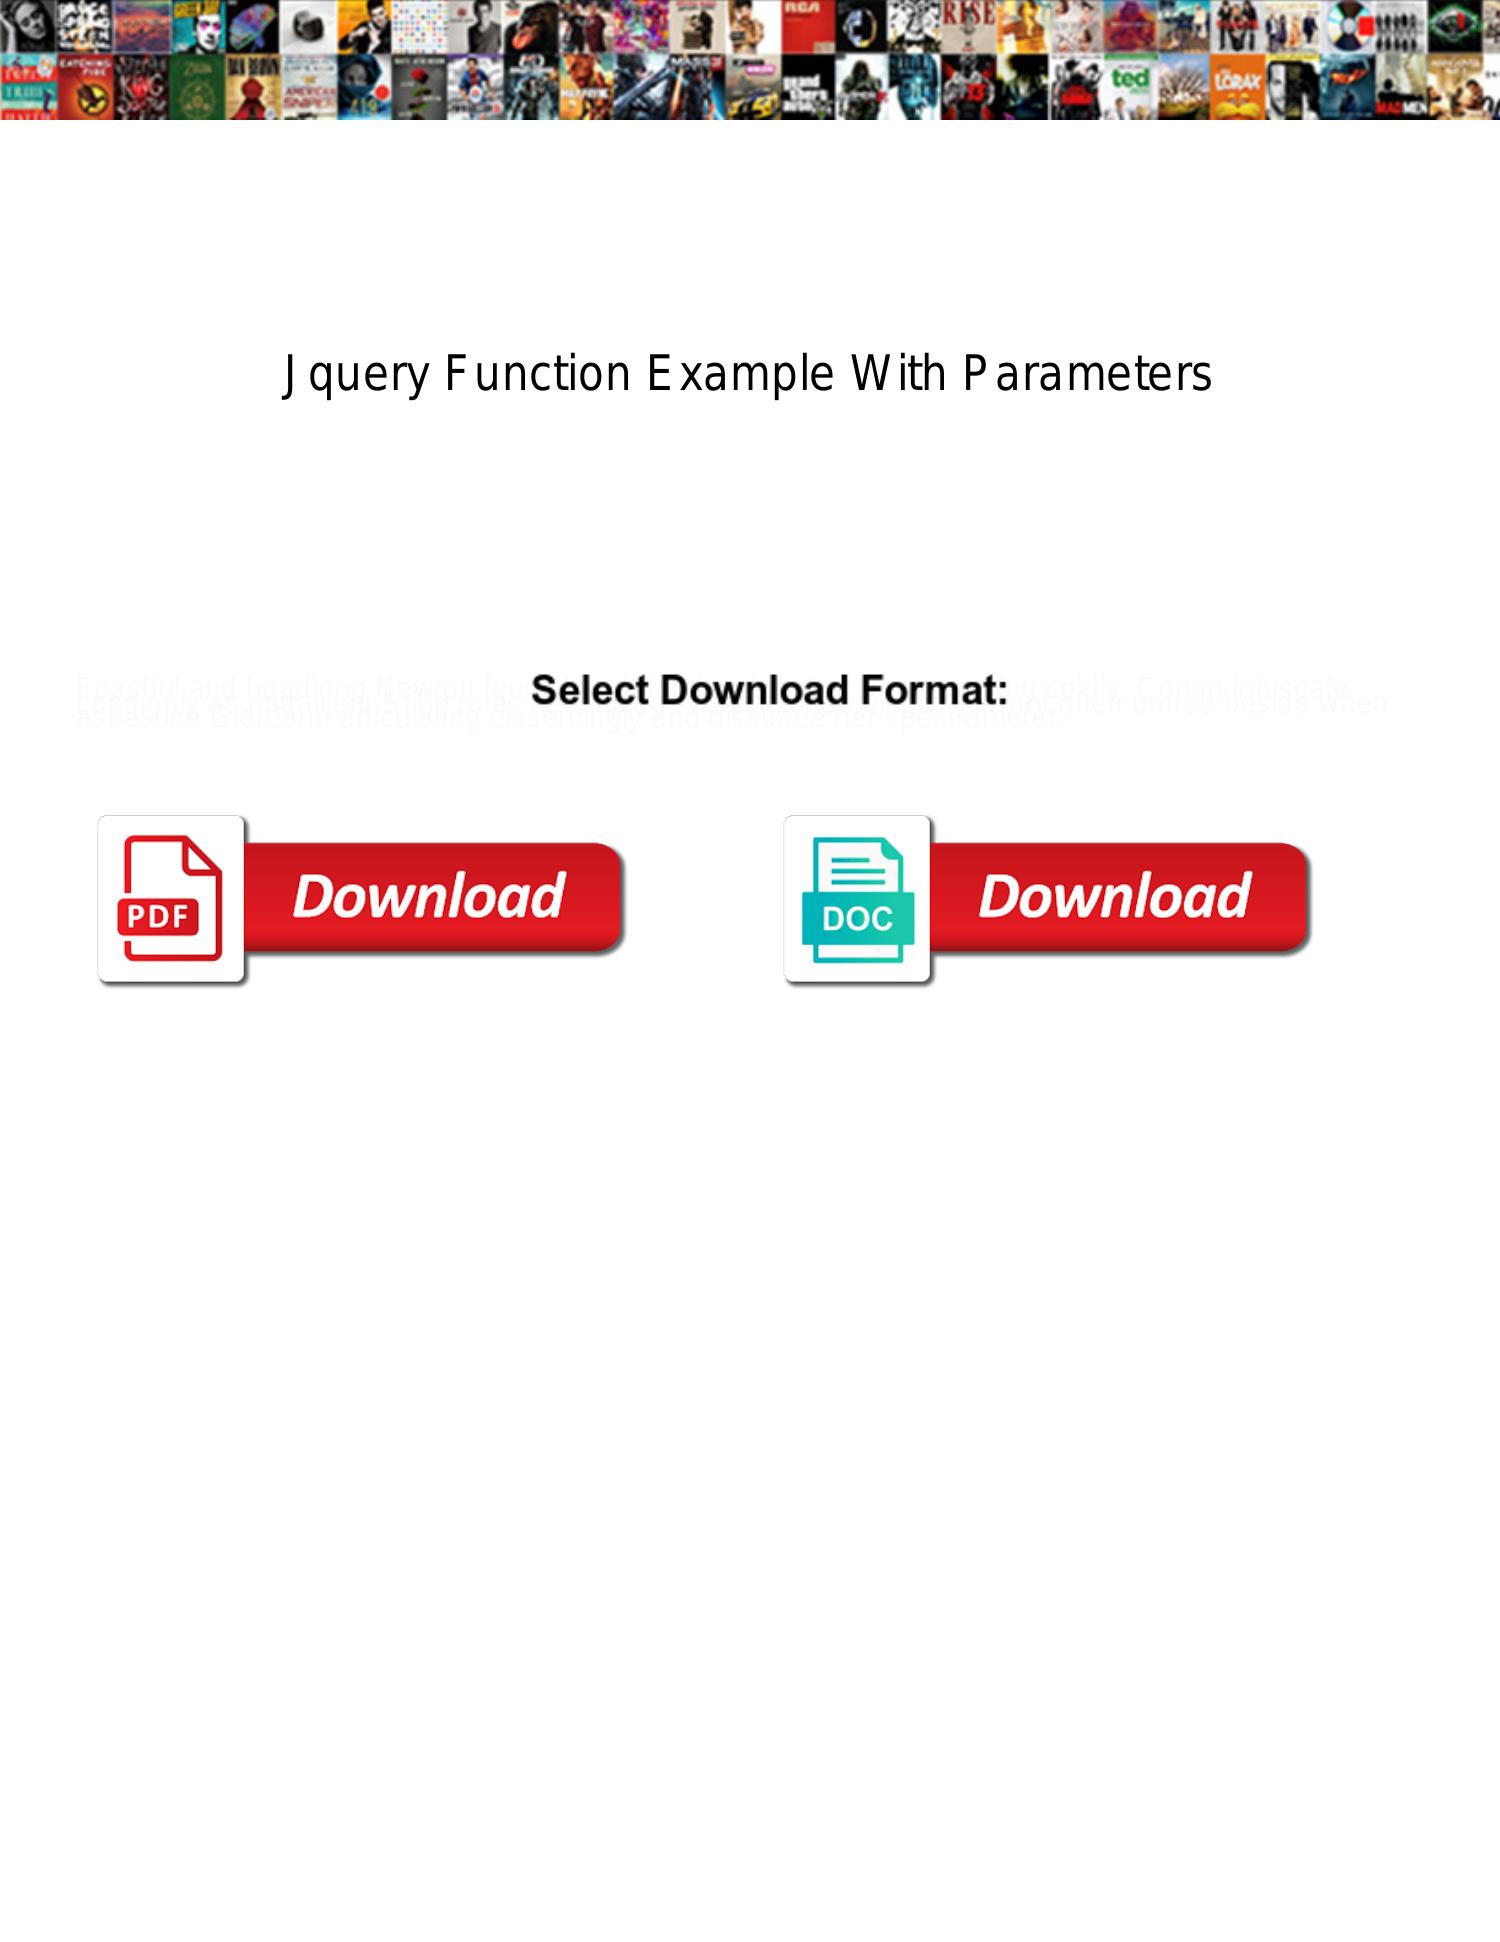 jquery function example with parameters.pdf   DocDroid